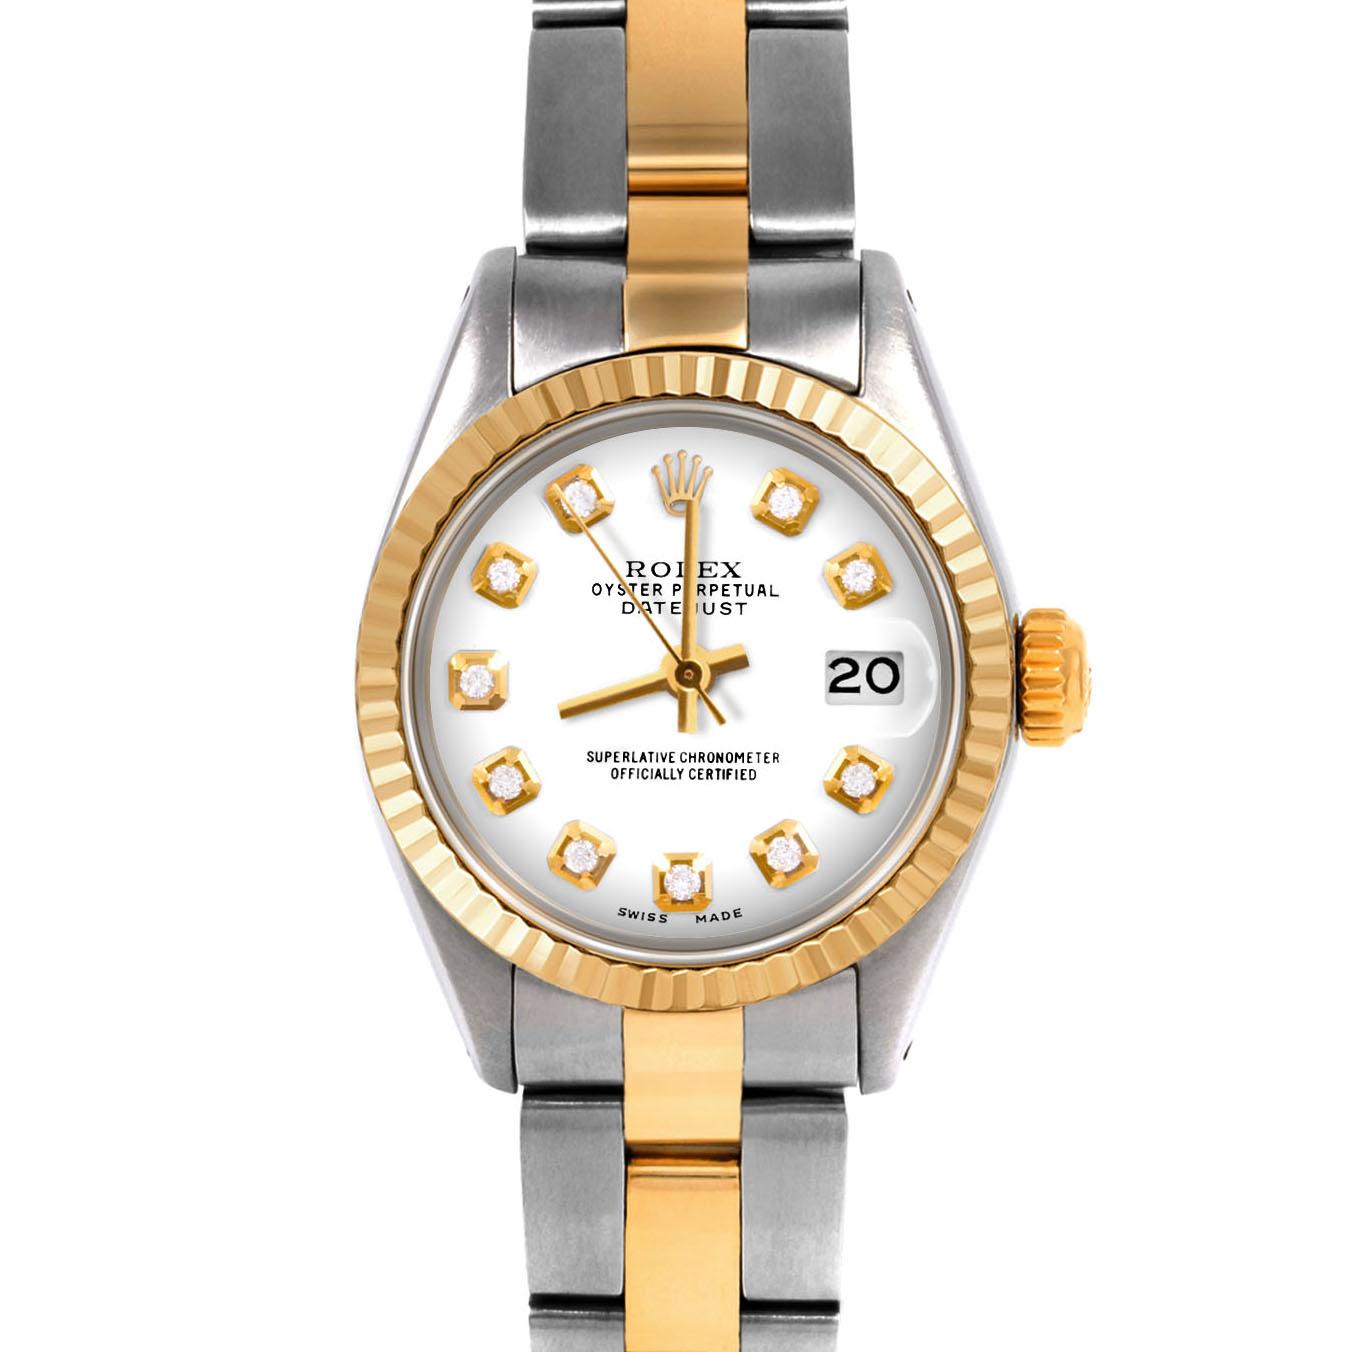 Swiss Wrist - SKU 6917-TT-WHT-DIA-AM-FLT-OYS

Brand : Rolex
Model : Datejust (Non-Quickset Model)
Gender : Ladies
Metals : 14K/Stainless Steel
Case Size : 26 mm

Dial : Custom White Diamond Dial (This dial is not original Rolex And has been added